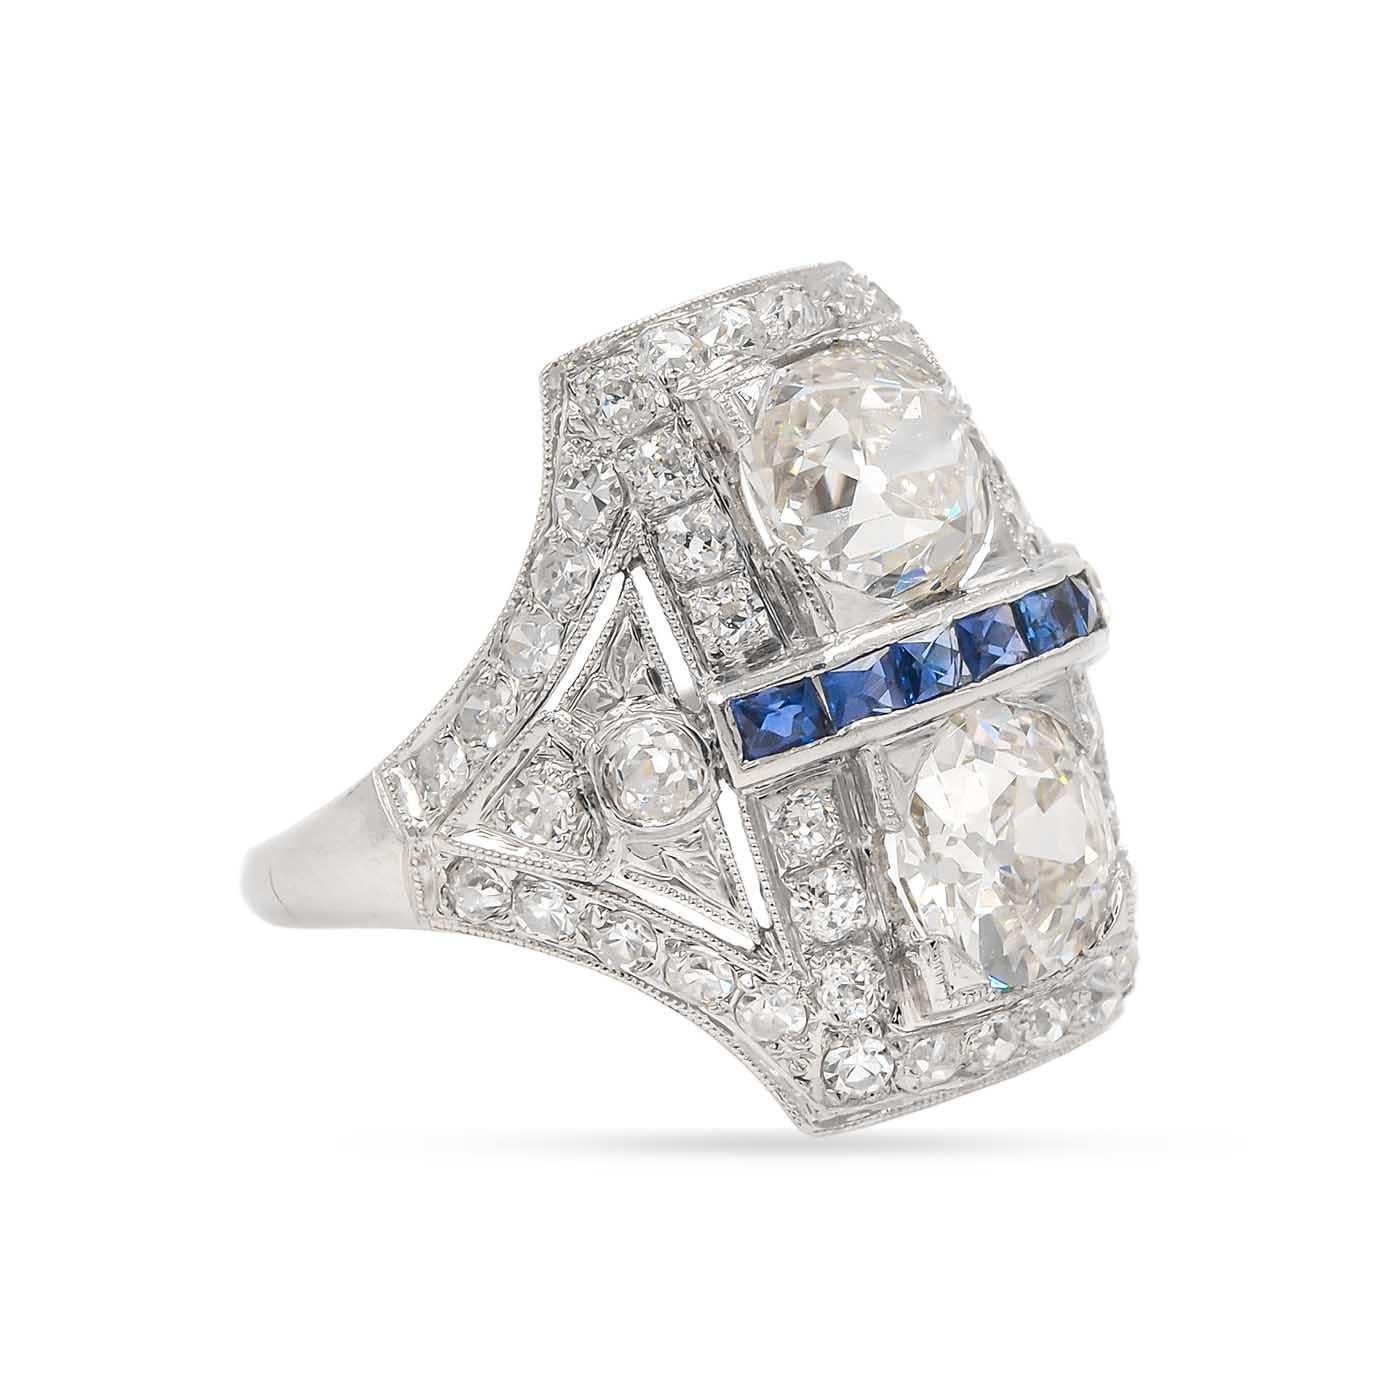 Superb Art Deco era 2-Stone Ring with two Old Mine Cut Diamonds and Sapphires, composed of platinum.  One of the Old Mine Cut diamonds weighs 1.26 carats, GIA certified K color/VS2 clarity. The other Old Mine Cut diamond weighing approximately 1.01